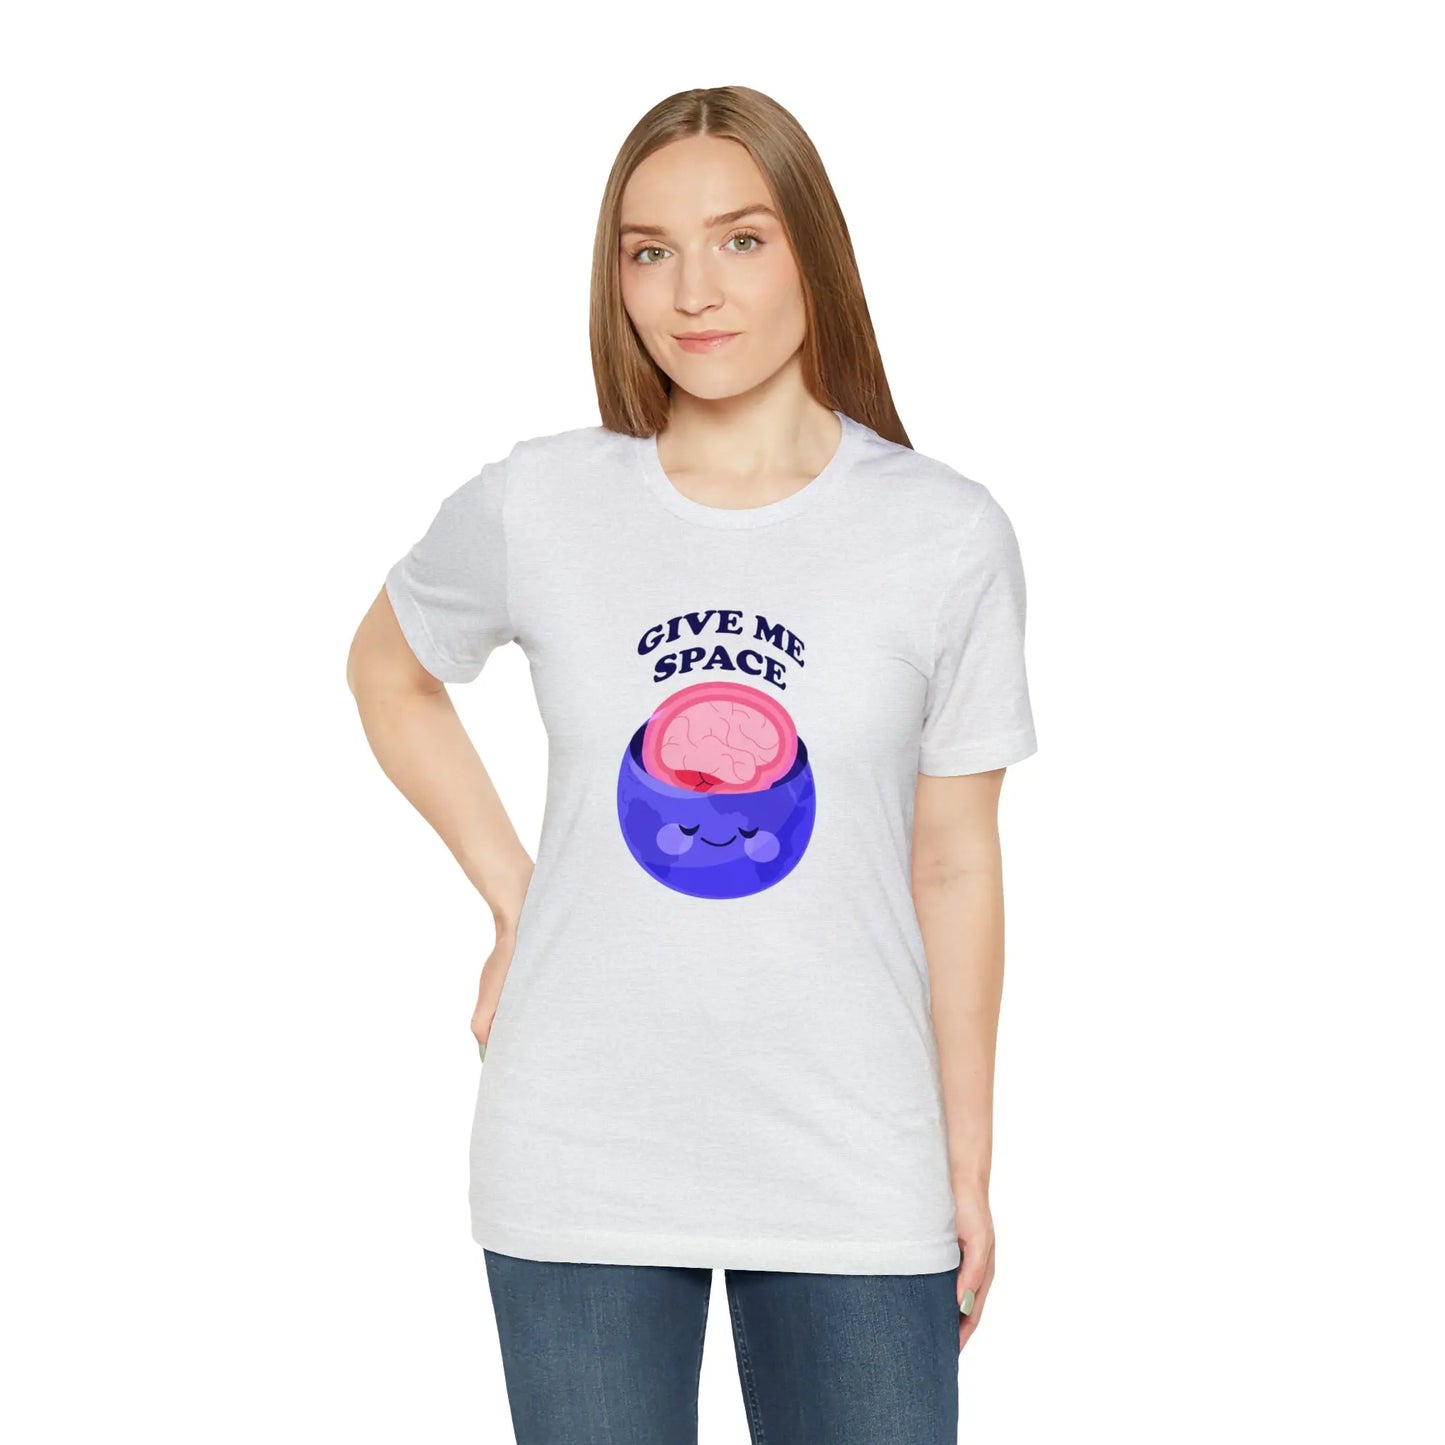 Give Me Space Autism T-Shirt